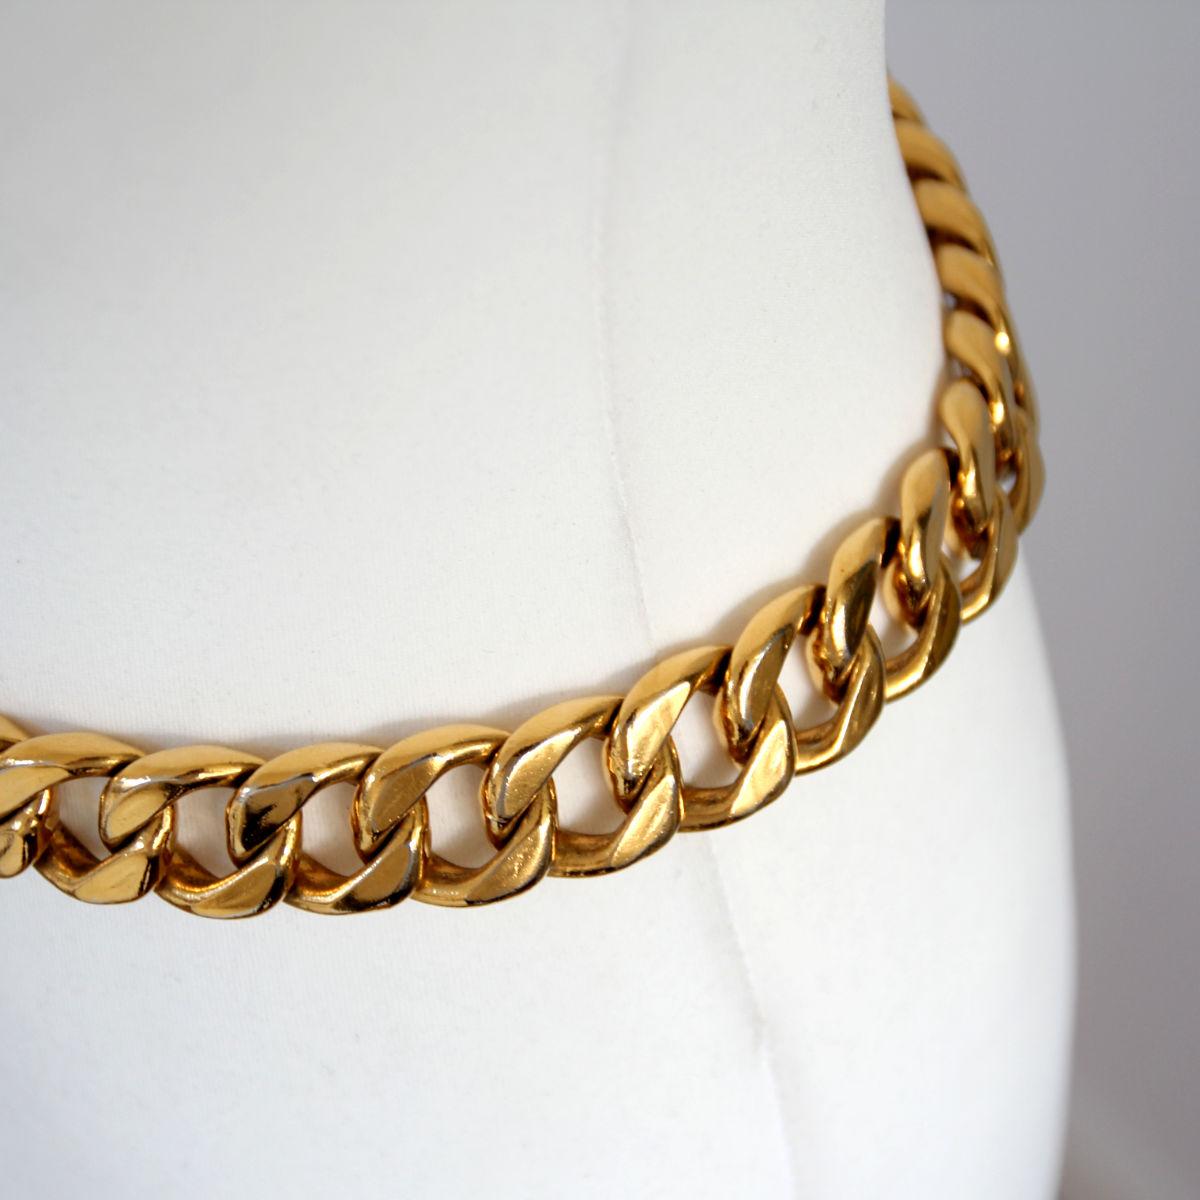 CHANEL 1990s Gold Toned Jumbo Chain Belt / Necklace With Chanel Plaque 8